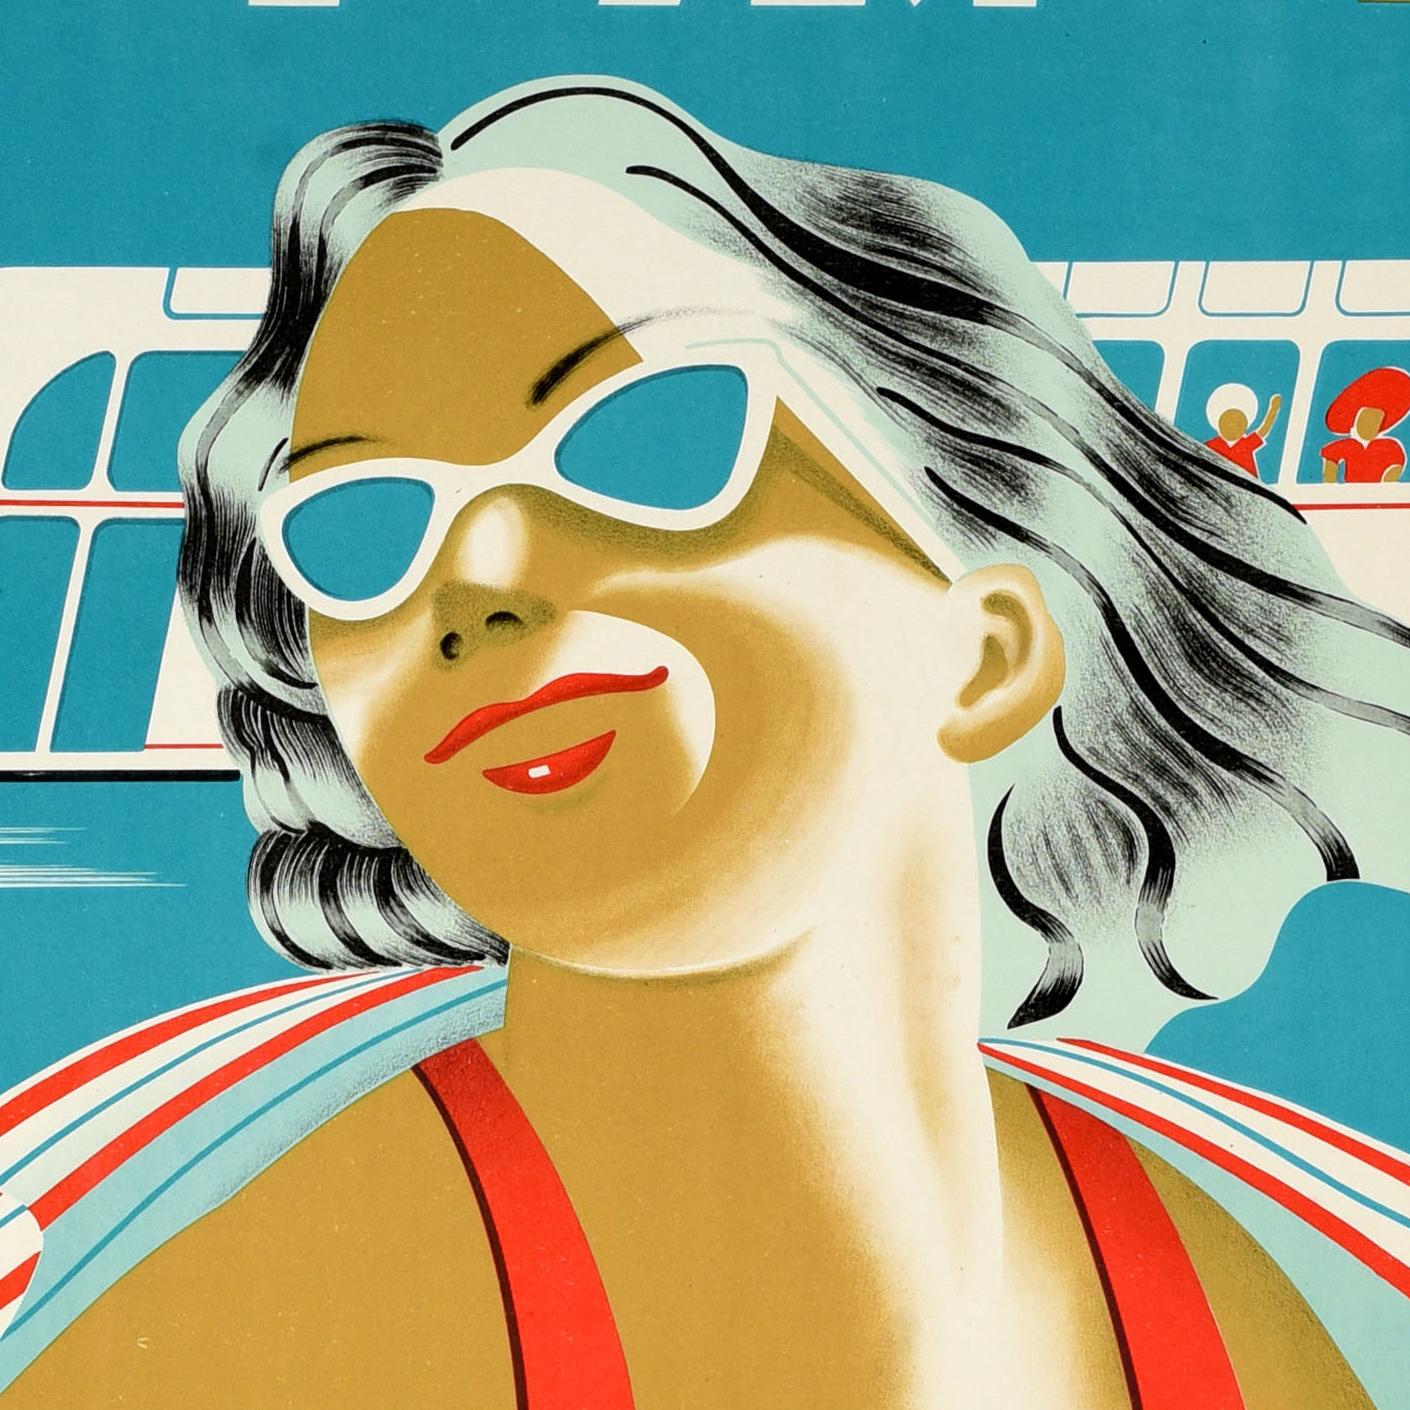 Original vintage travel poster for Lake Biwa in Japan advertising group trips to the swimming lake by comfortable tour bus featuring a smiling lady wearing sunglasses and a red swimsuit with a colourful towel over her shoulders in front of a bus